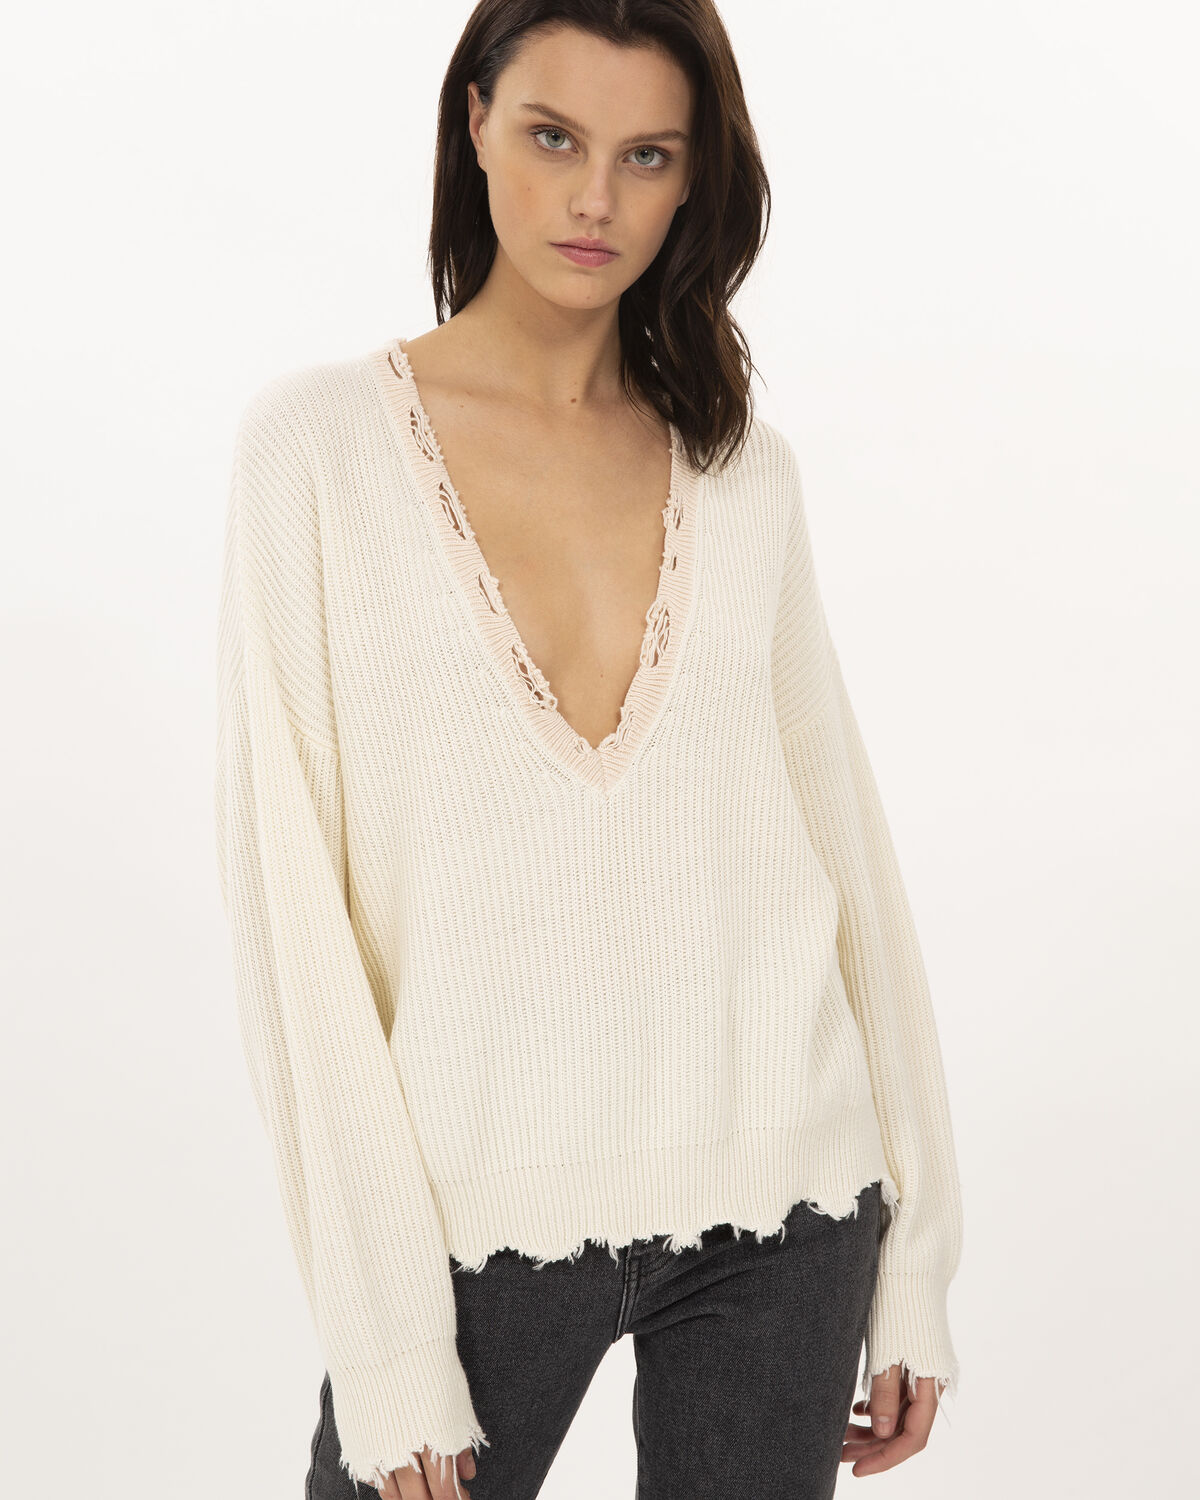 Photo of IRO Paris Shore Sweater Ecru - This Cashmere And Cotton Blend Sweater Is Distinguished By Its Frayed Details. With Its Two-tone Dipped V Neckline And Visible Mesh, It Will Bring A Touch Of Glamour To Your Outfits. New In